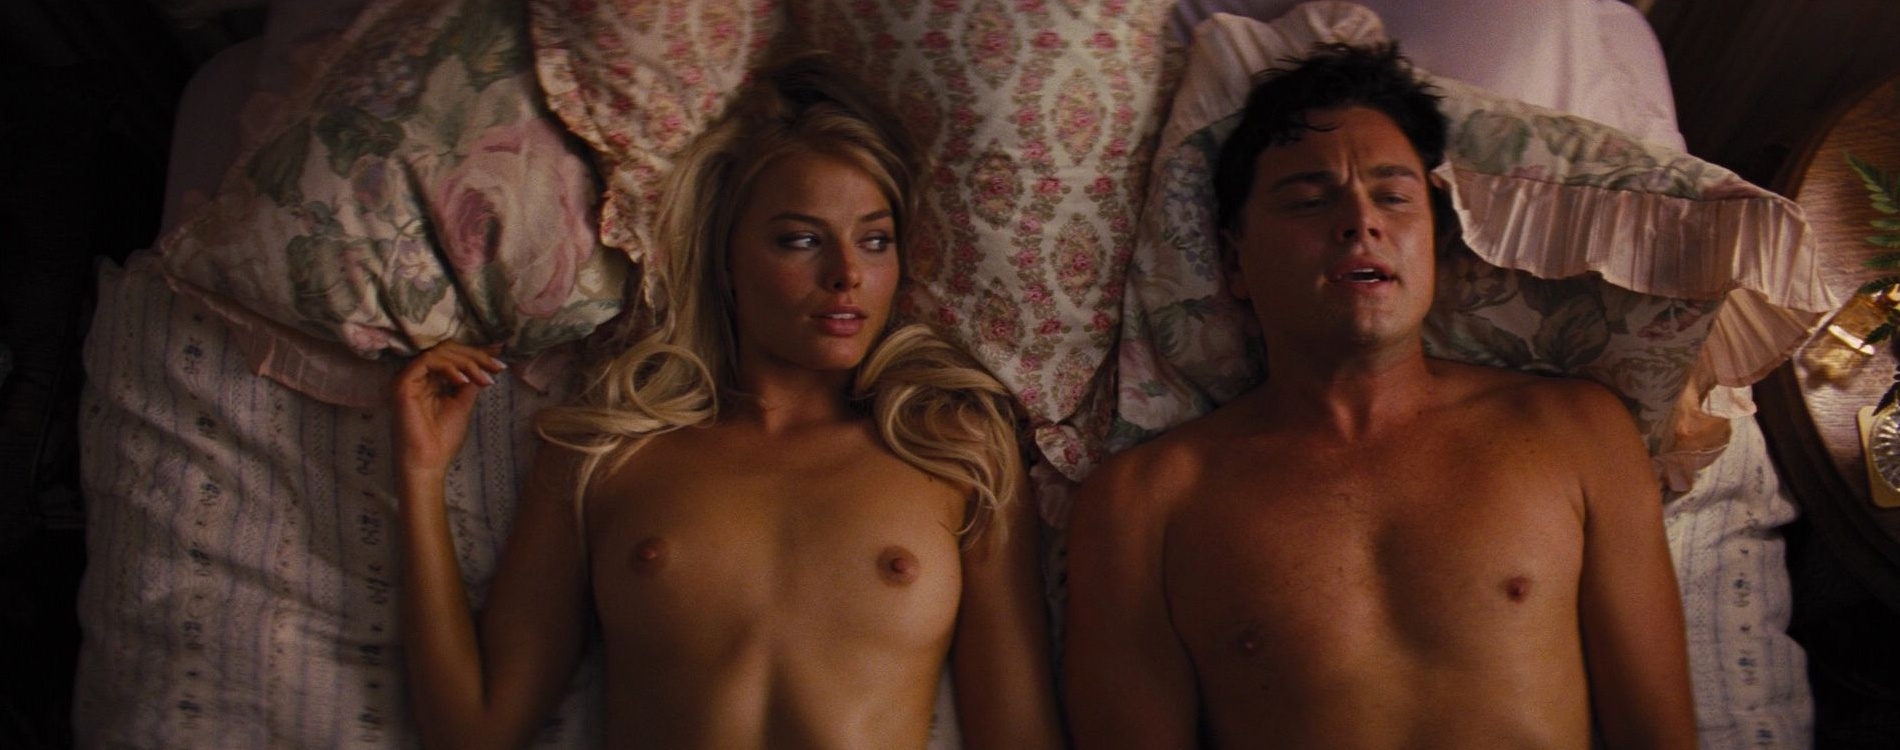 Margot_Robbie_in_The_Wolf_of_Wall_Street_2013_-_TheFappeningBlog.com-5.jpg